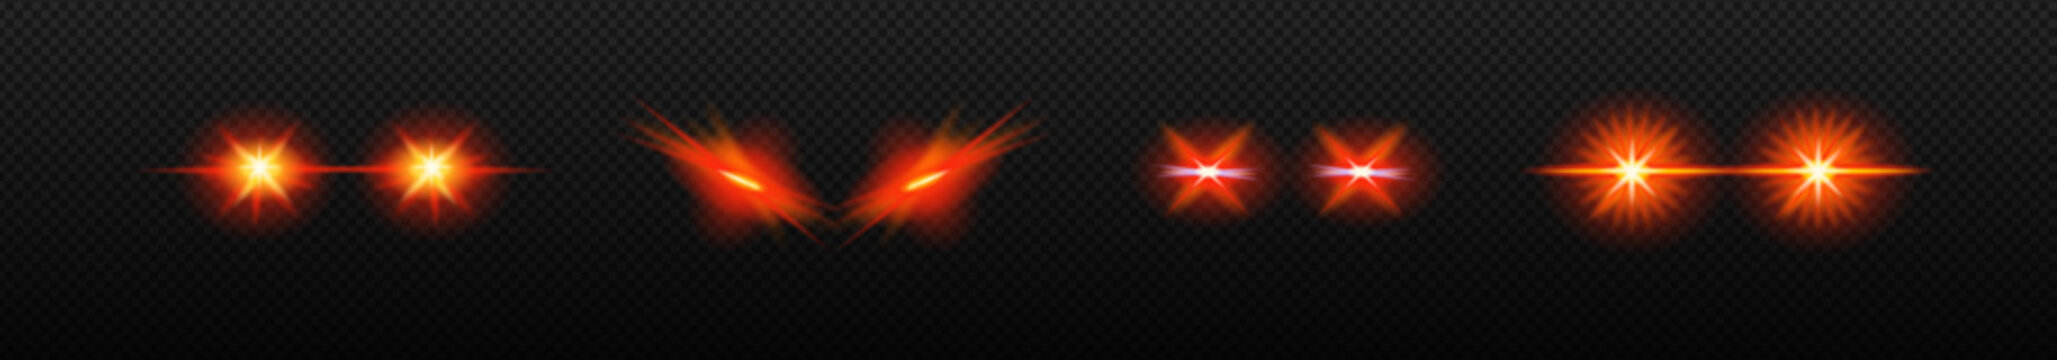 Laser glowing eyes set. Dangerous red light ferocious halloween evil and robot monsters with devil rays scary vector creatures